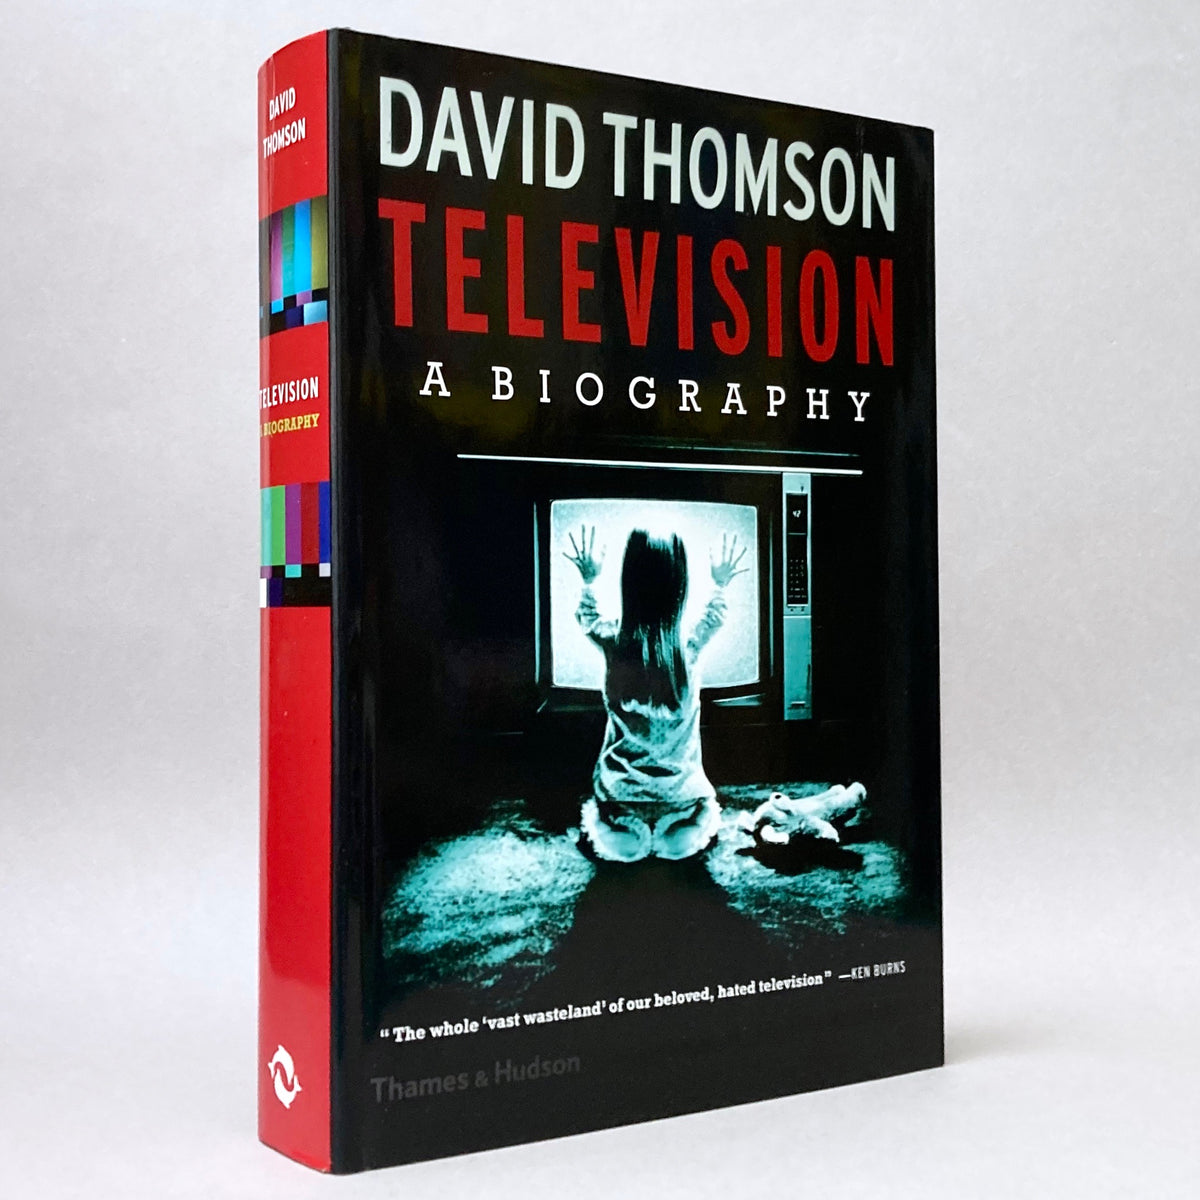 Television: A Biography (Non-mint)